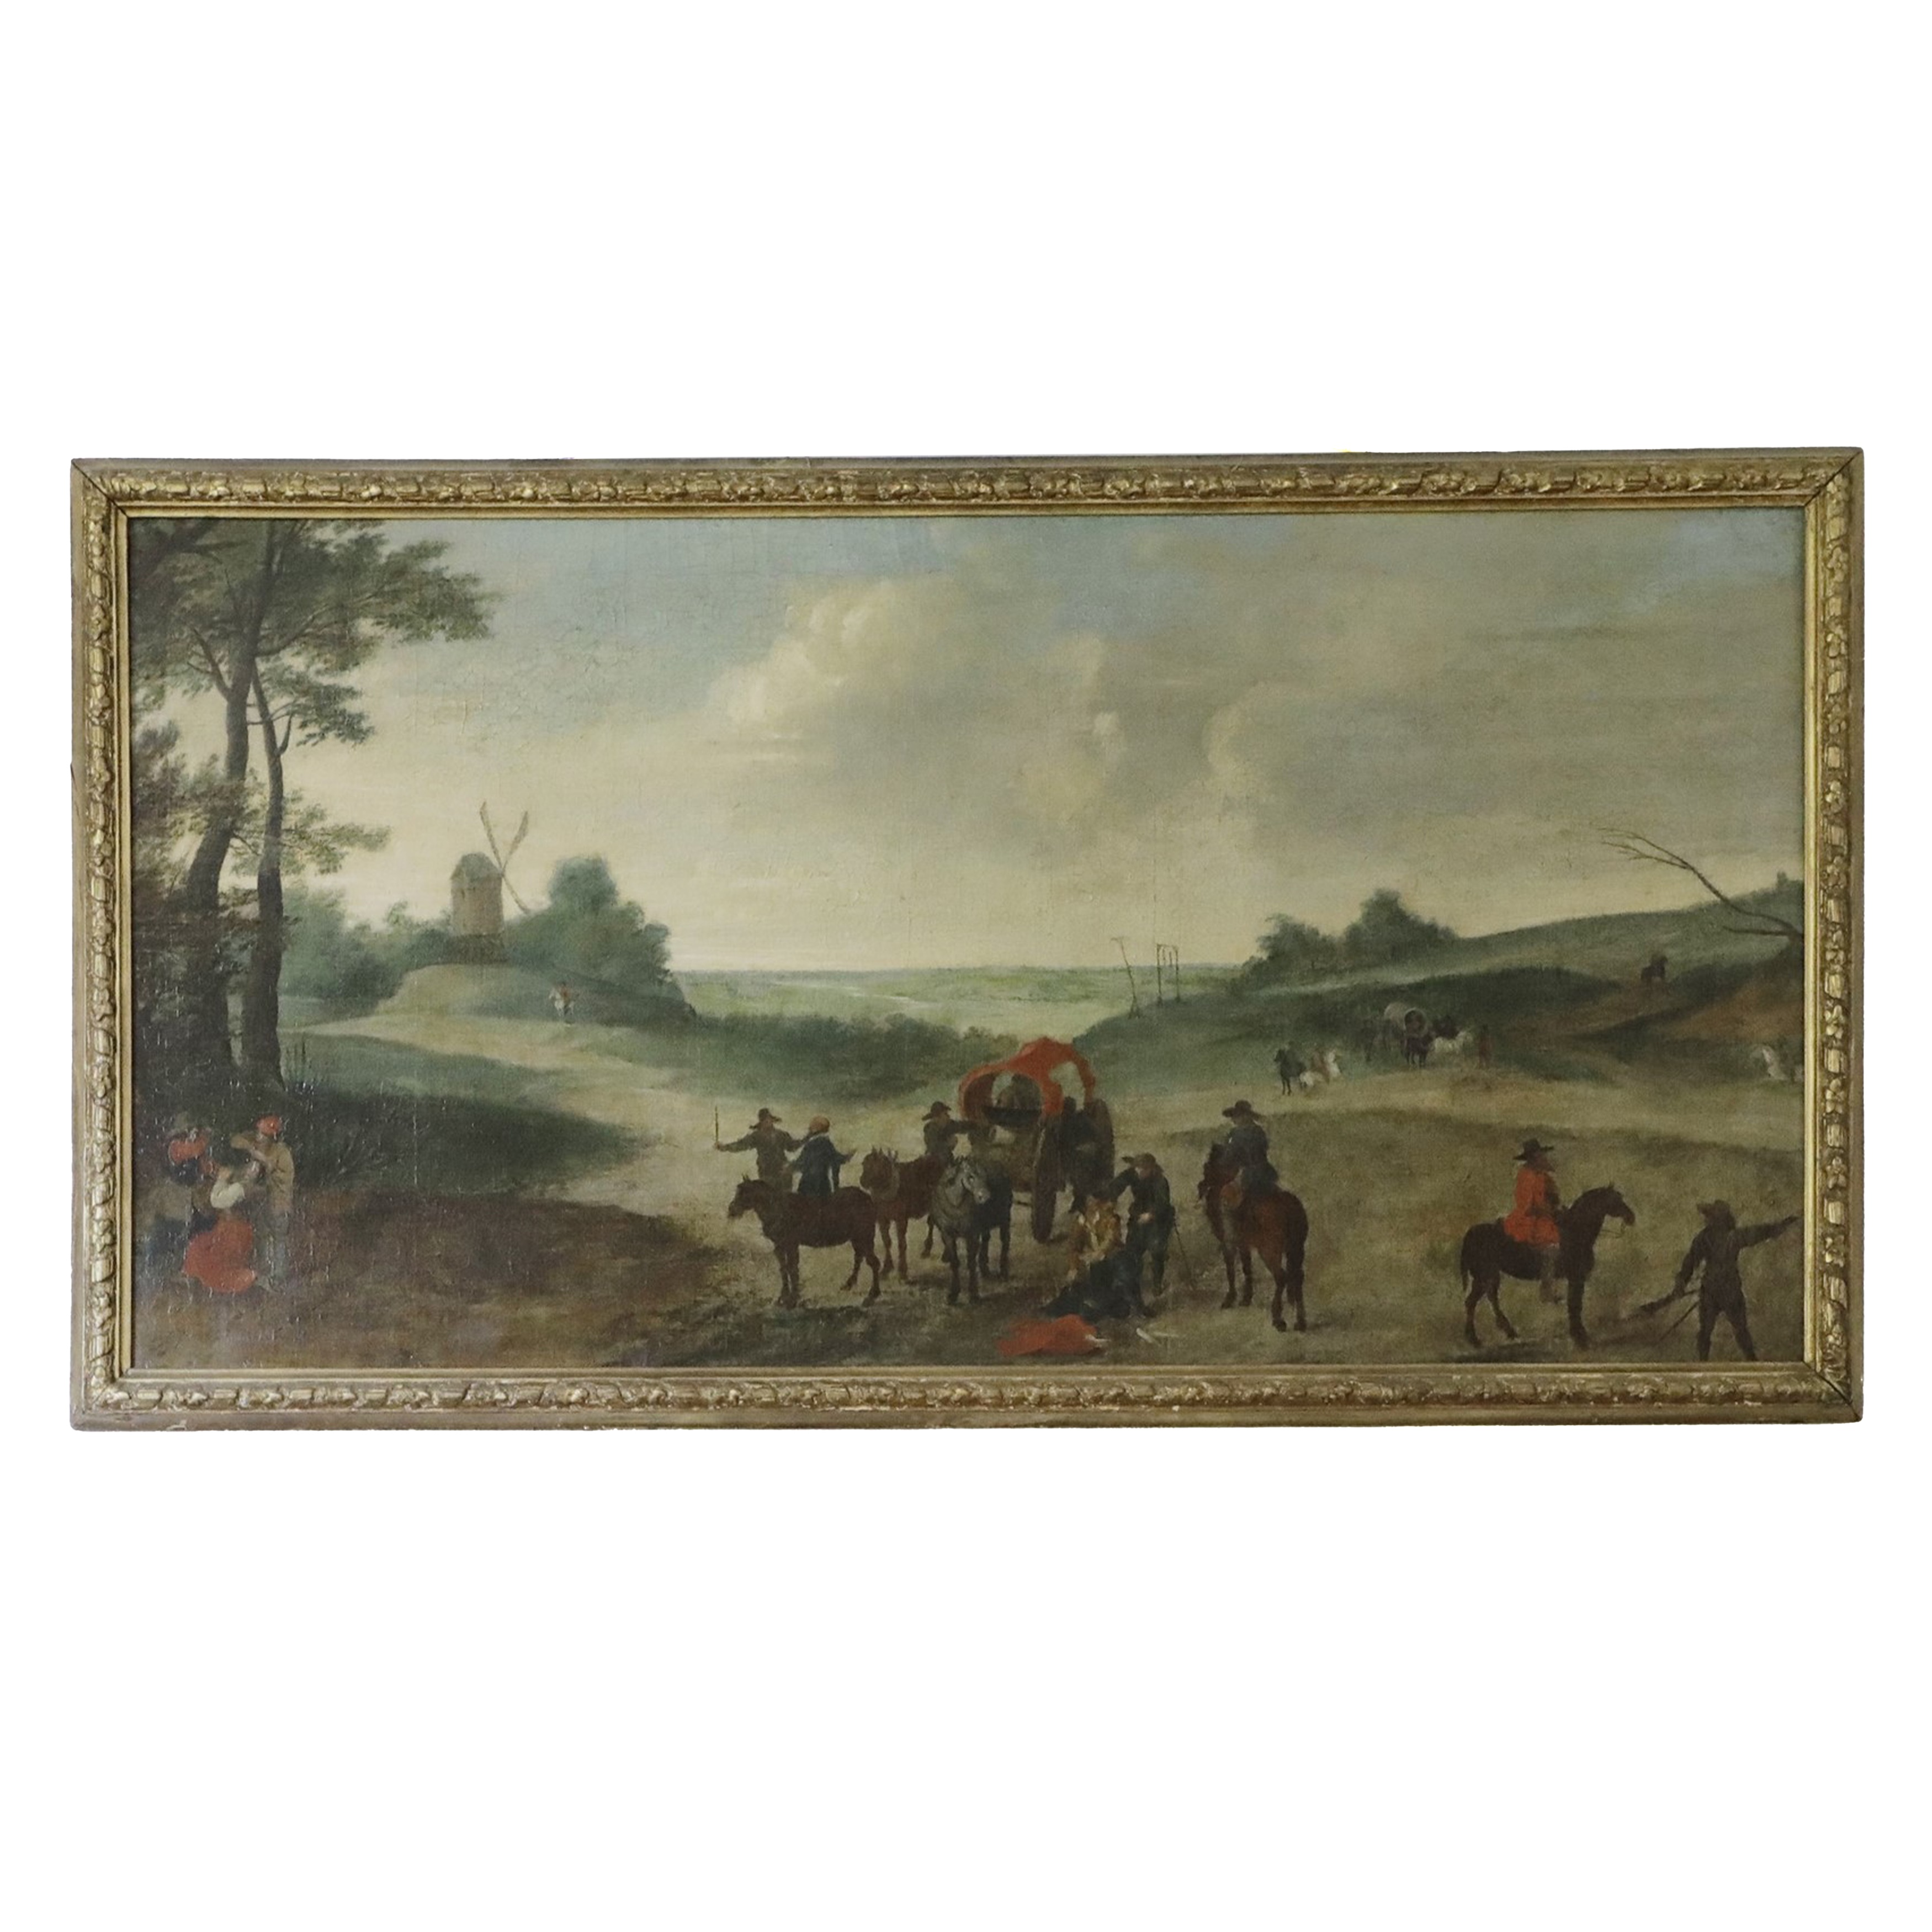 Follower of Joos de Momper, An extensive open landscape with figures and wagons